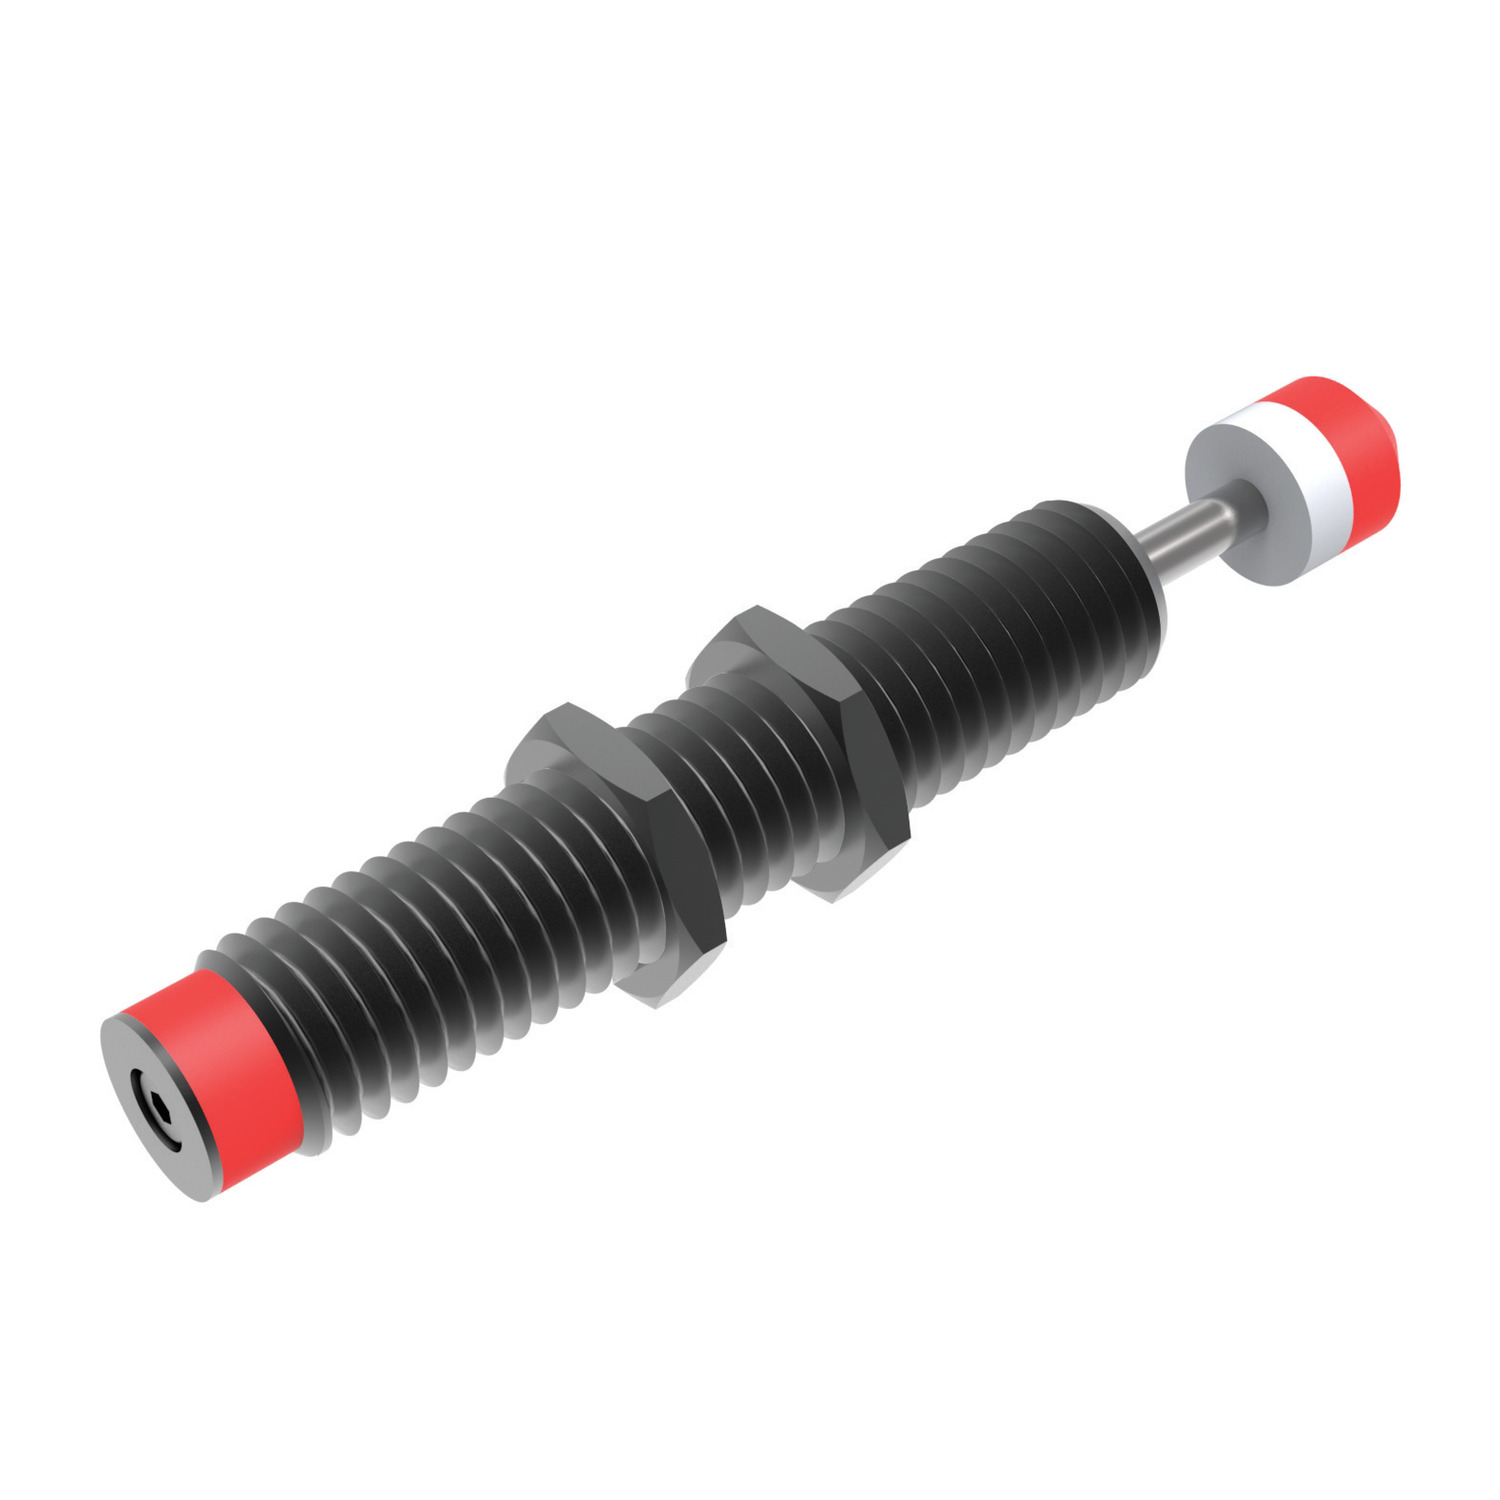 68002 - Shock Absorbers, Self Compensating